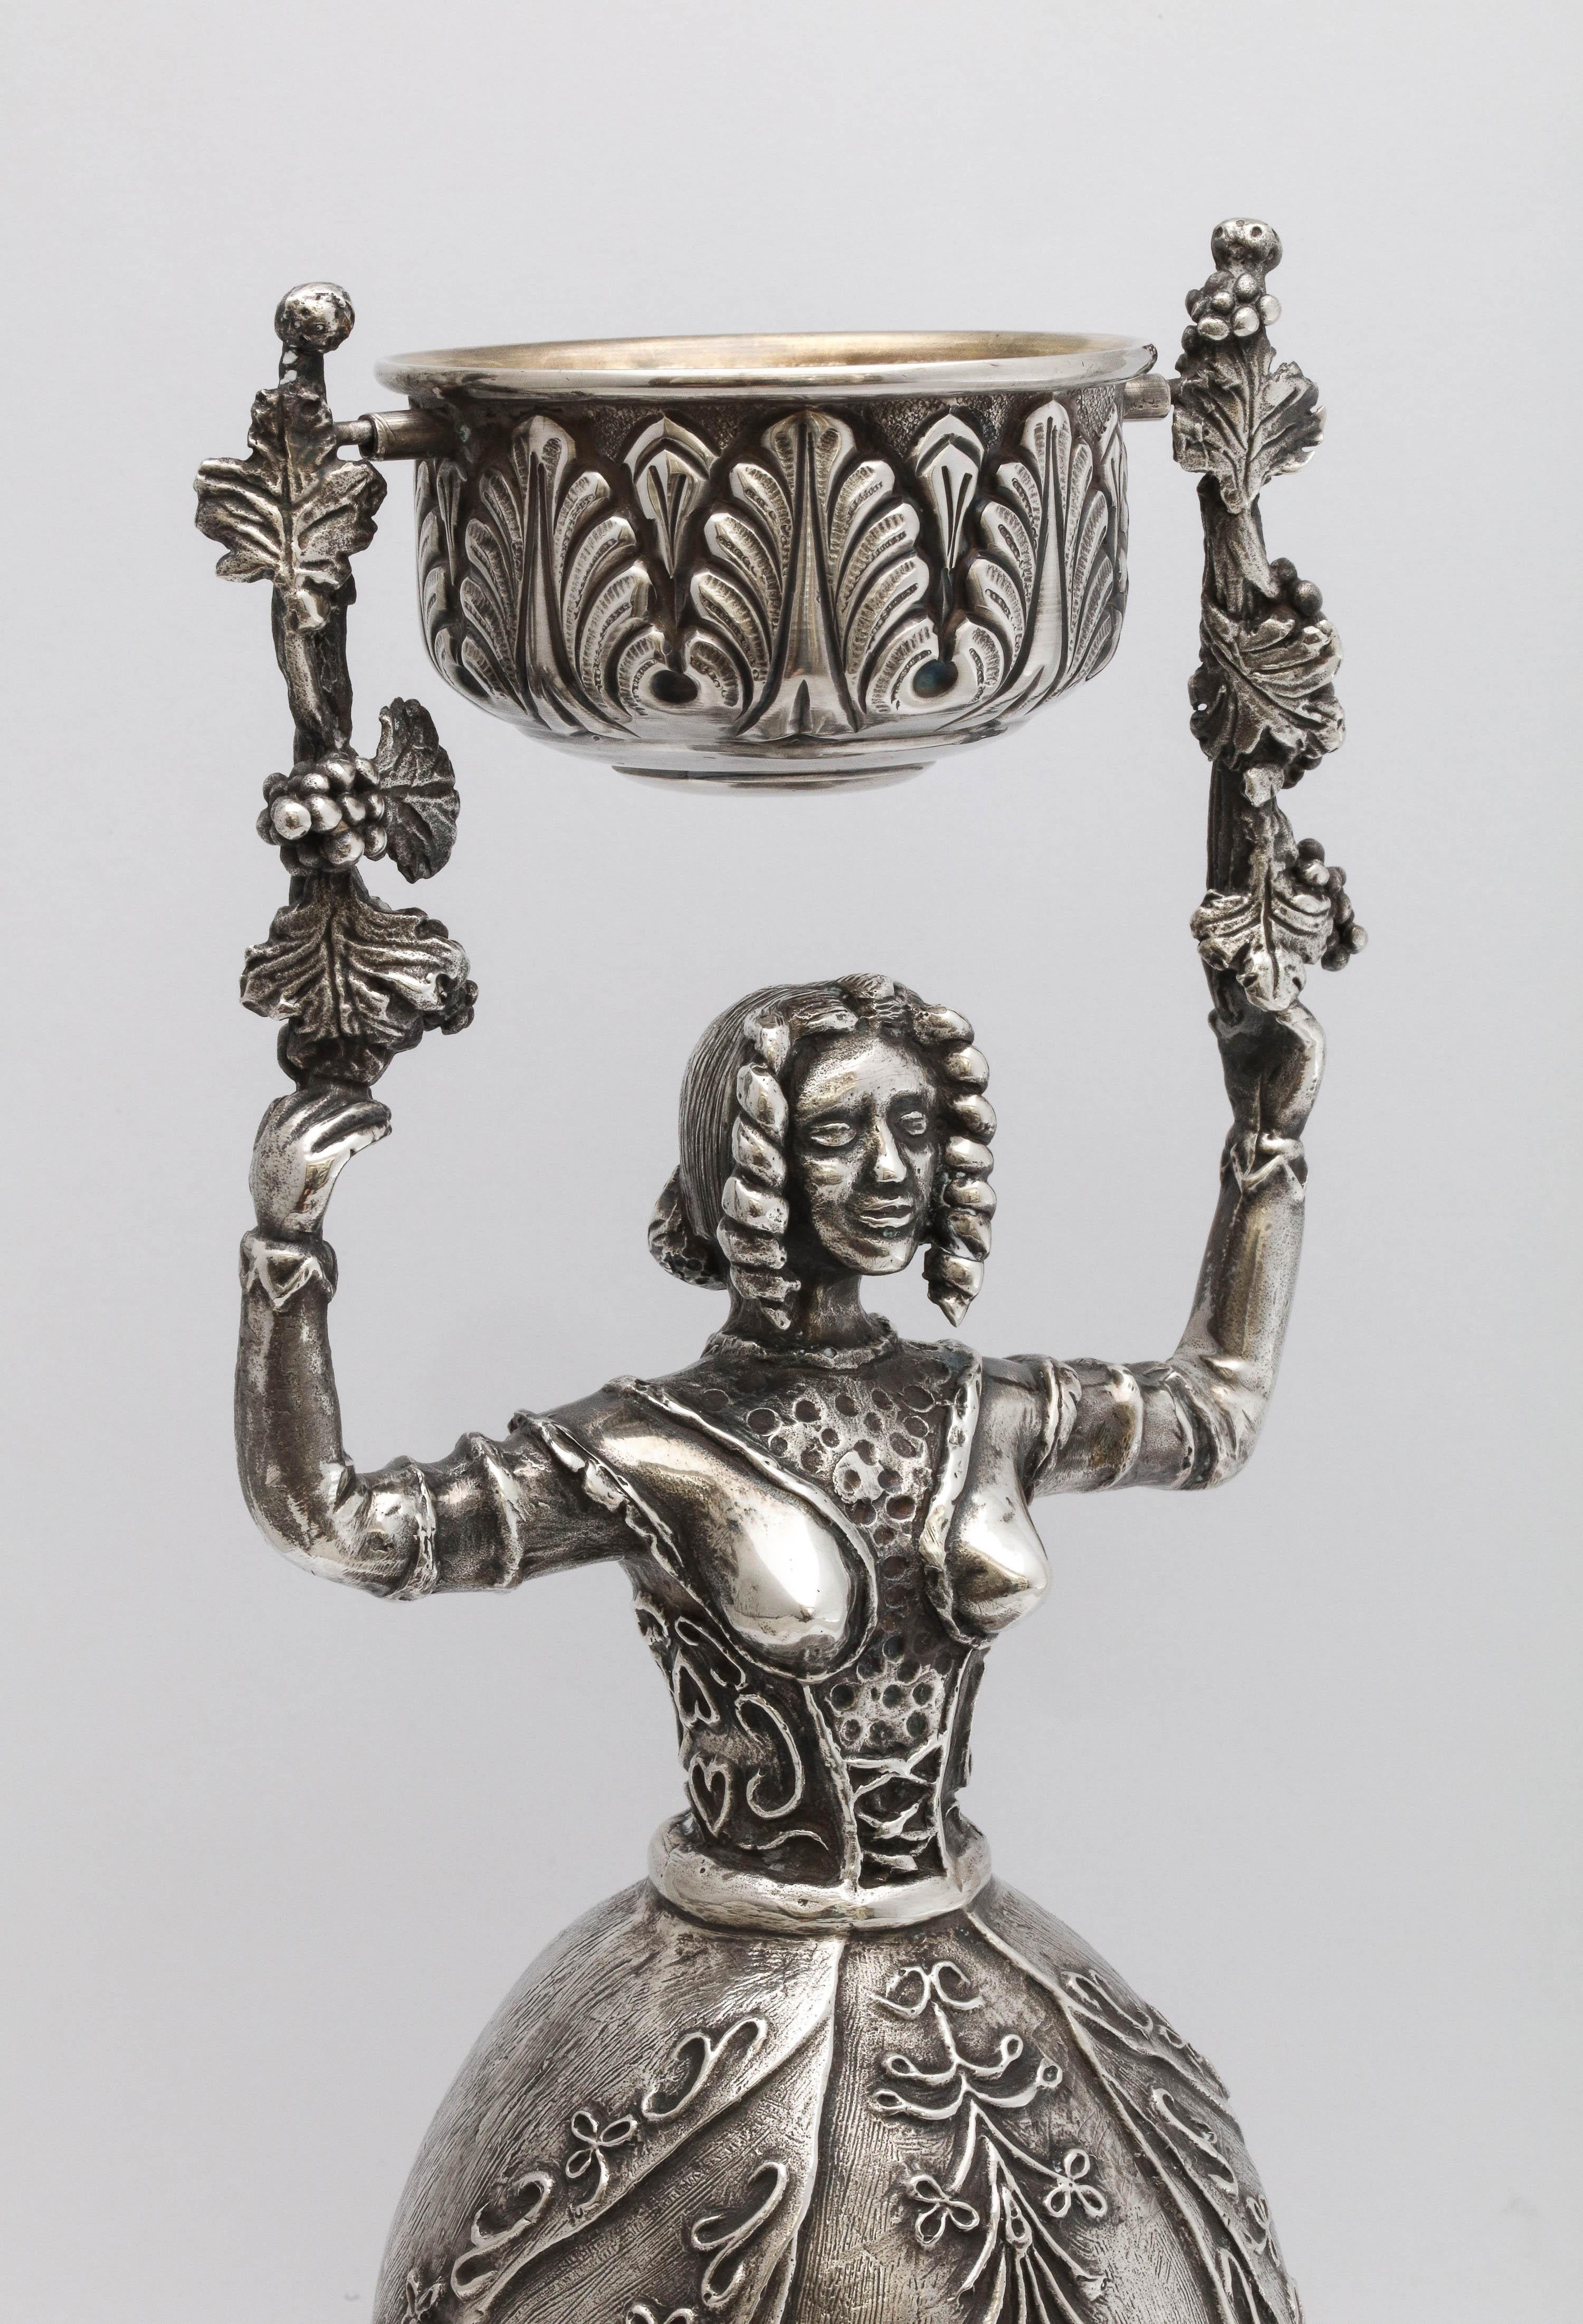 Gilt Large 17th Century-Style Sterling Silver Wager/Marriage Cup